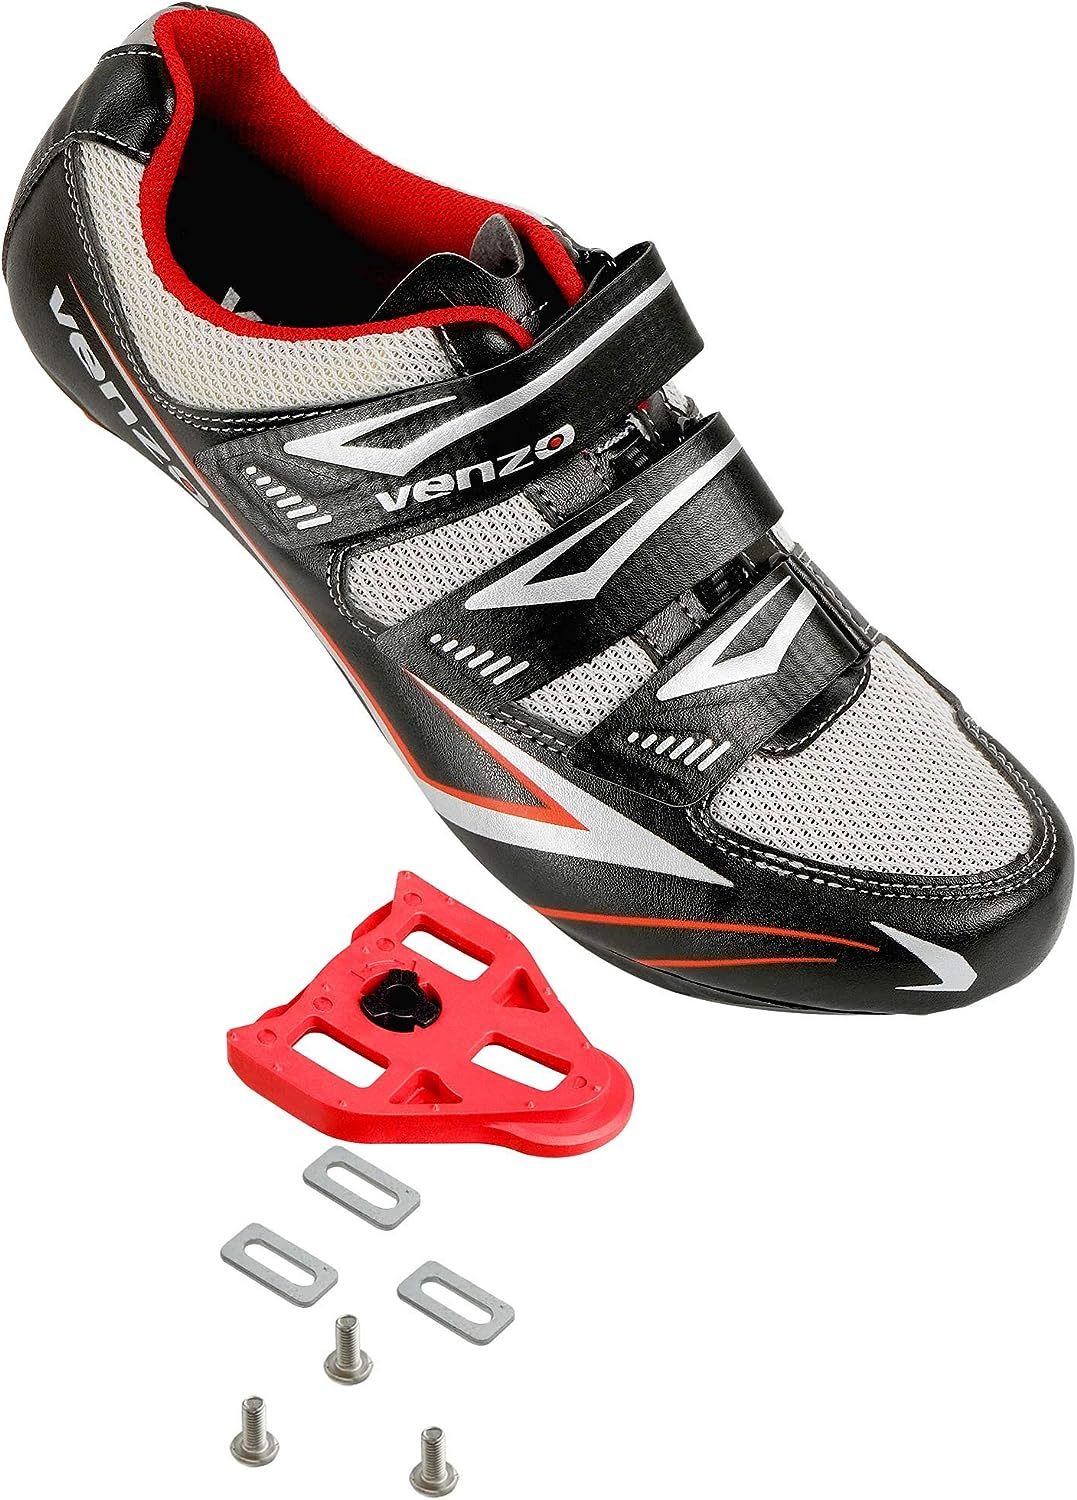 Men'S Venzo Bicycle Road Cycling Riding Shoes With 3 Straps, Delta Shimano Spd - $64.94